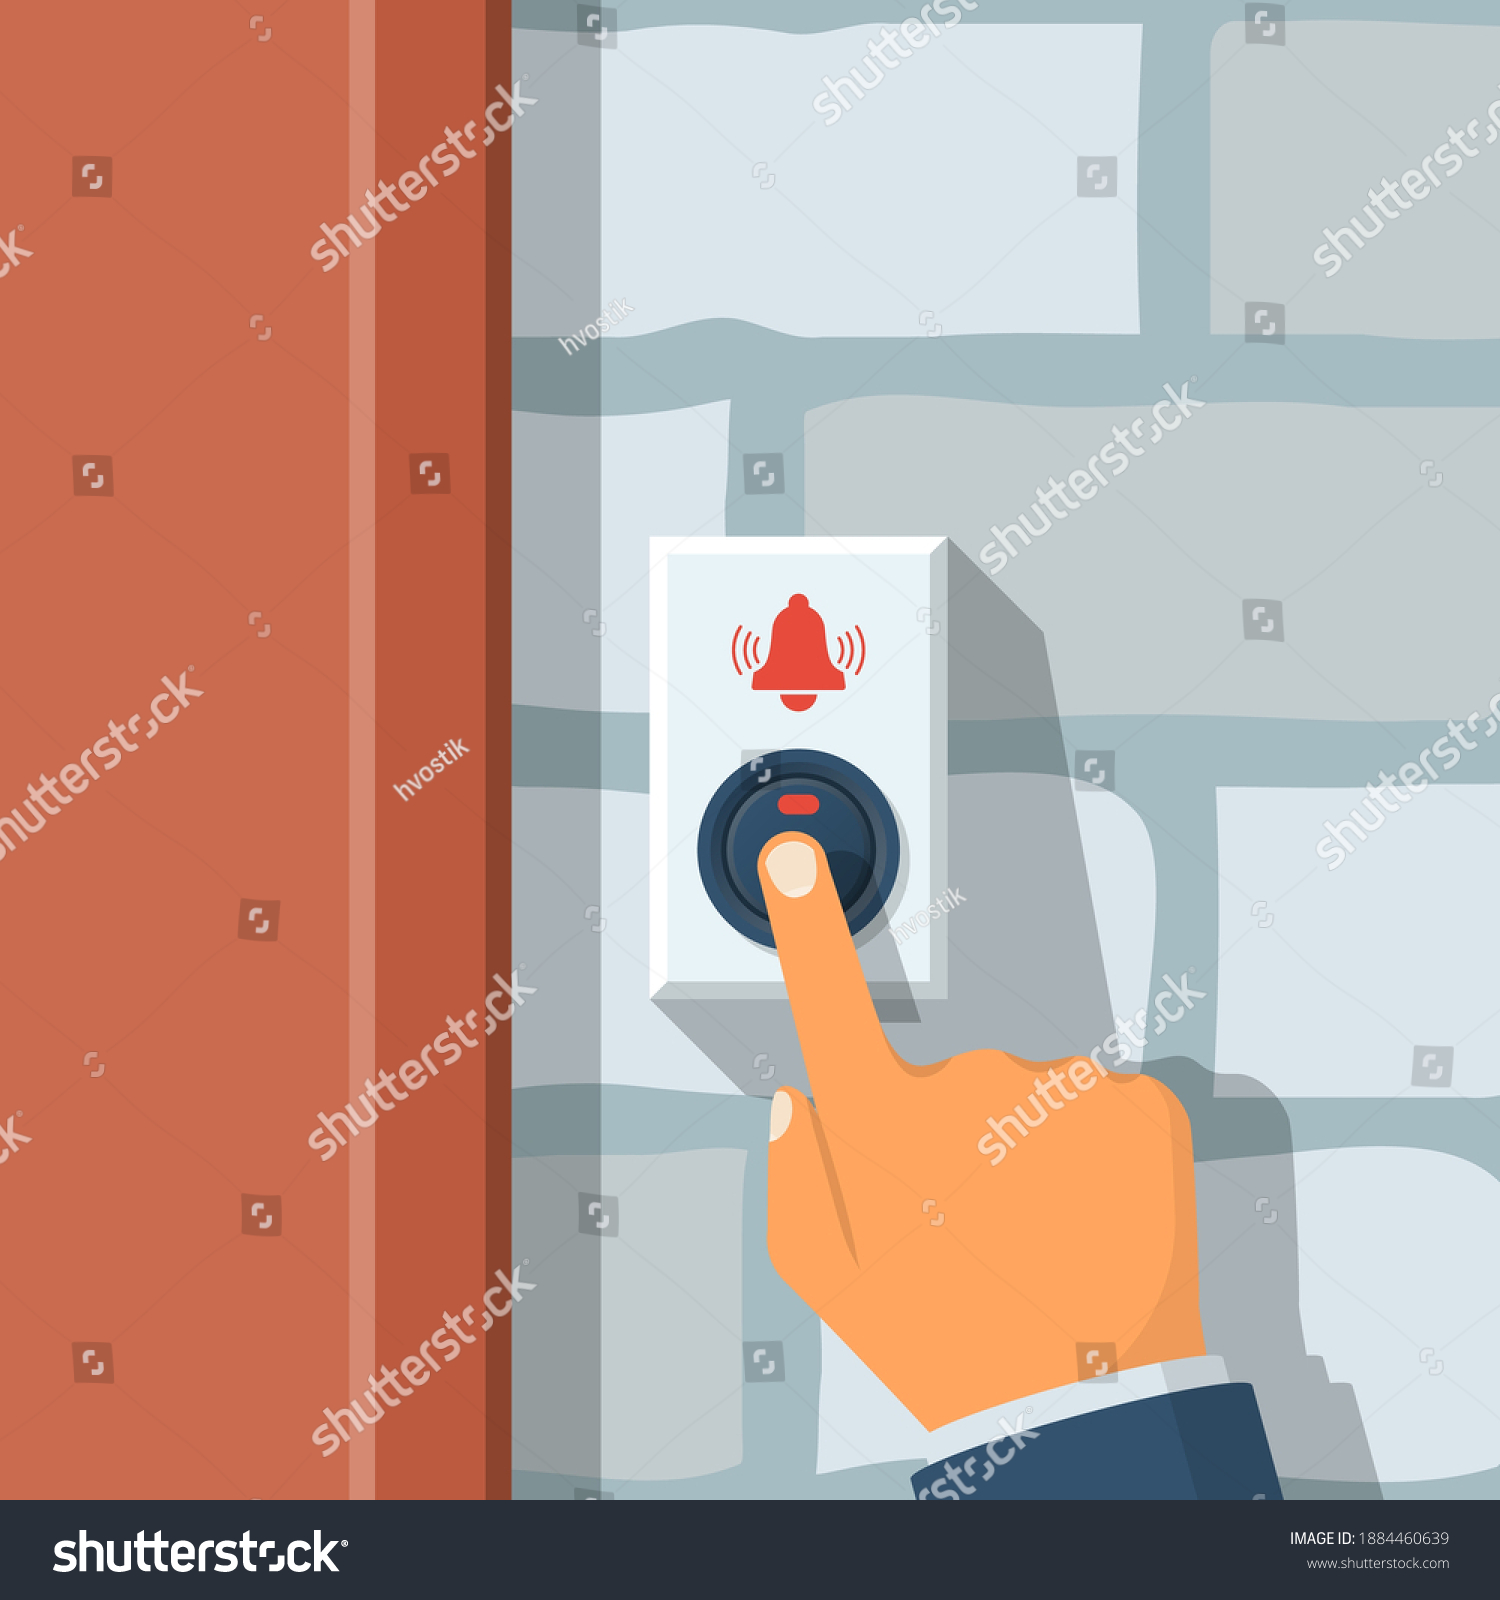 SVG of Man presses the doorbell button. Call button on a brick wall. Vector illustration flat design. Isolated on white background. svg